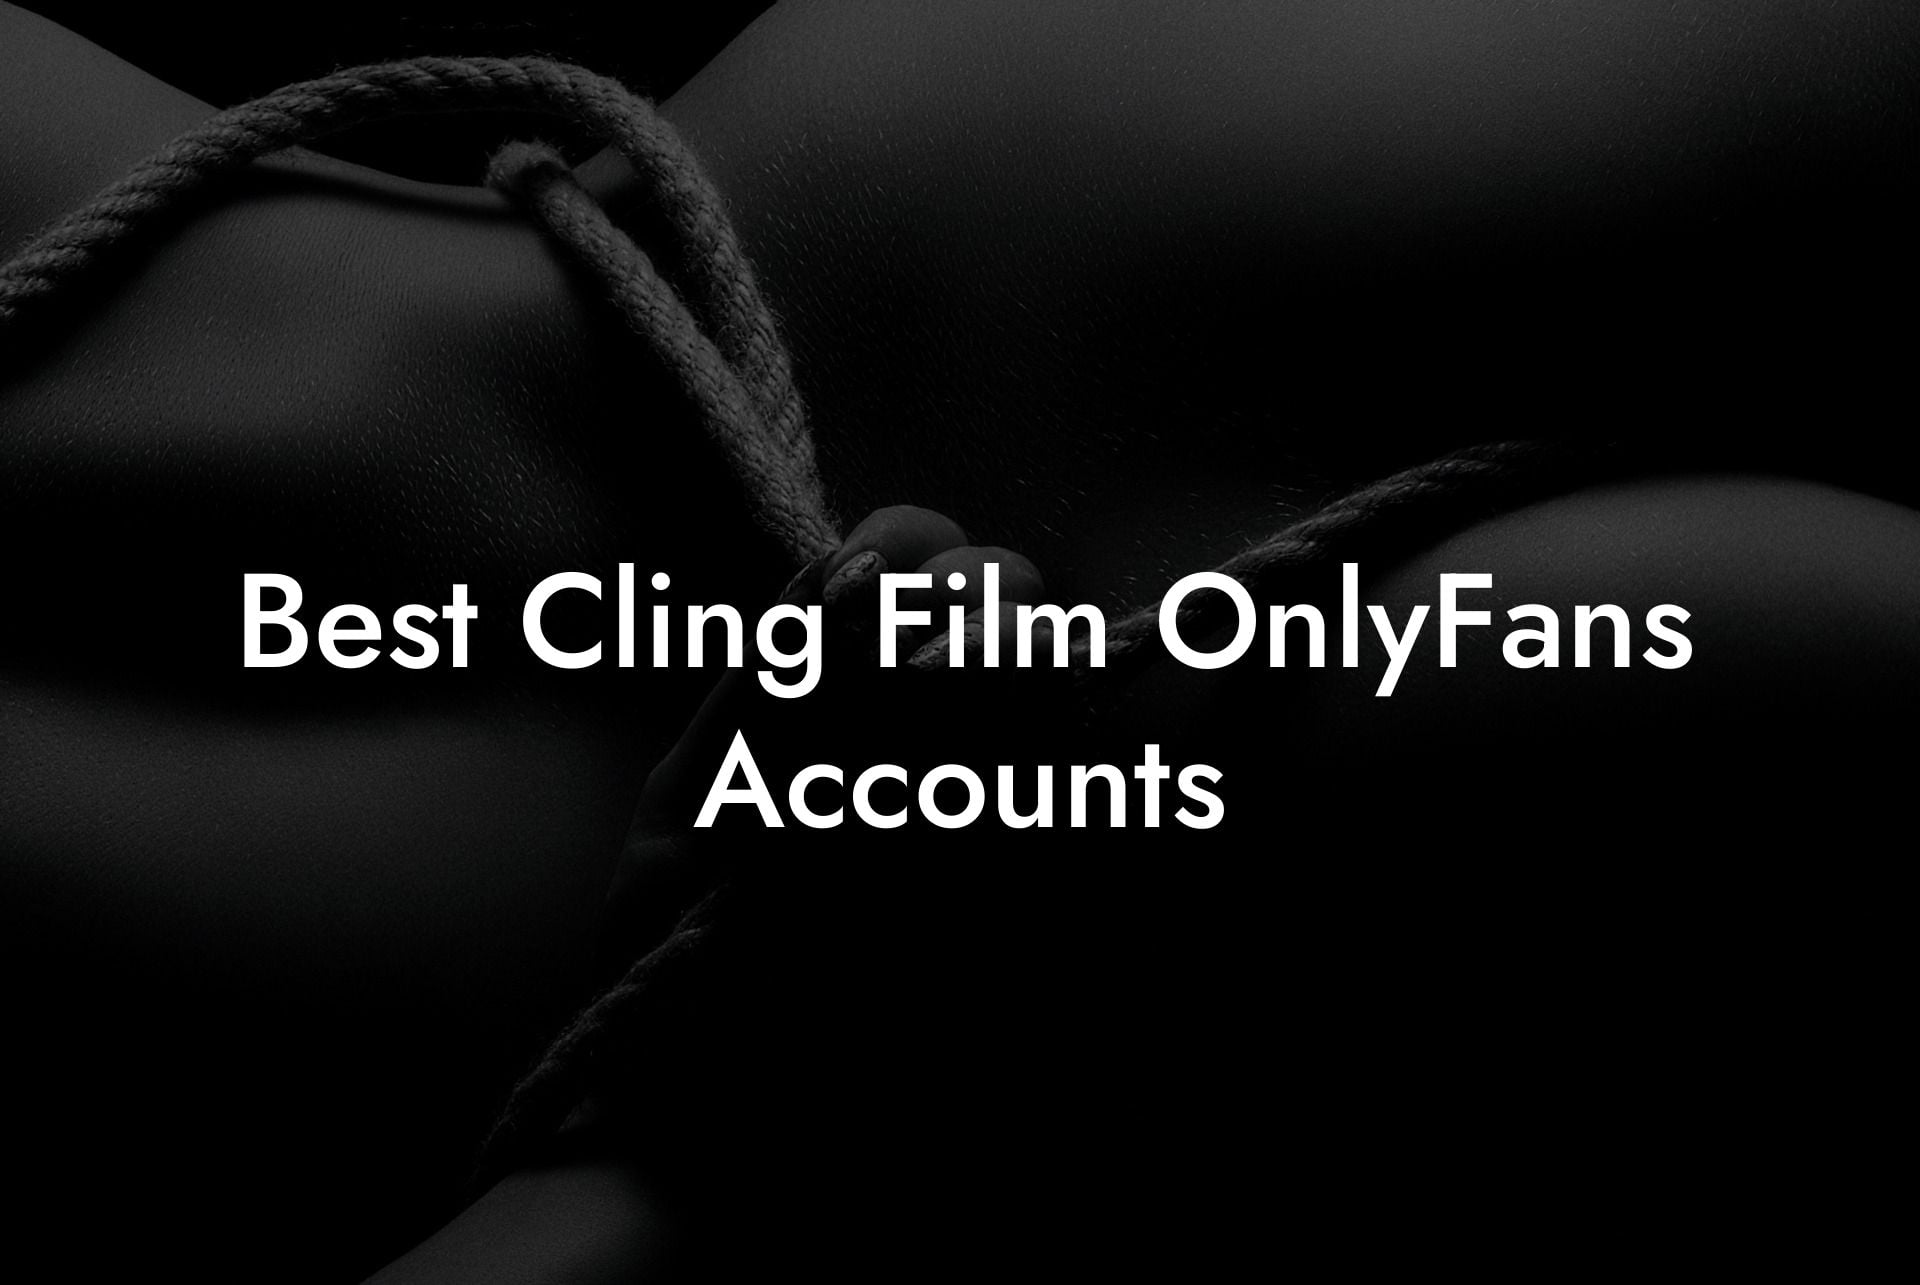 Best Cling Film OnlyFans Accounts